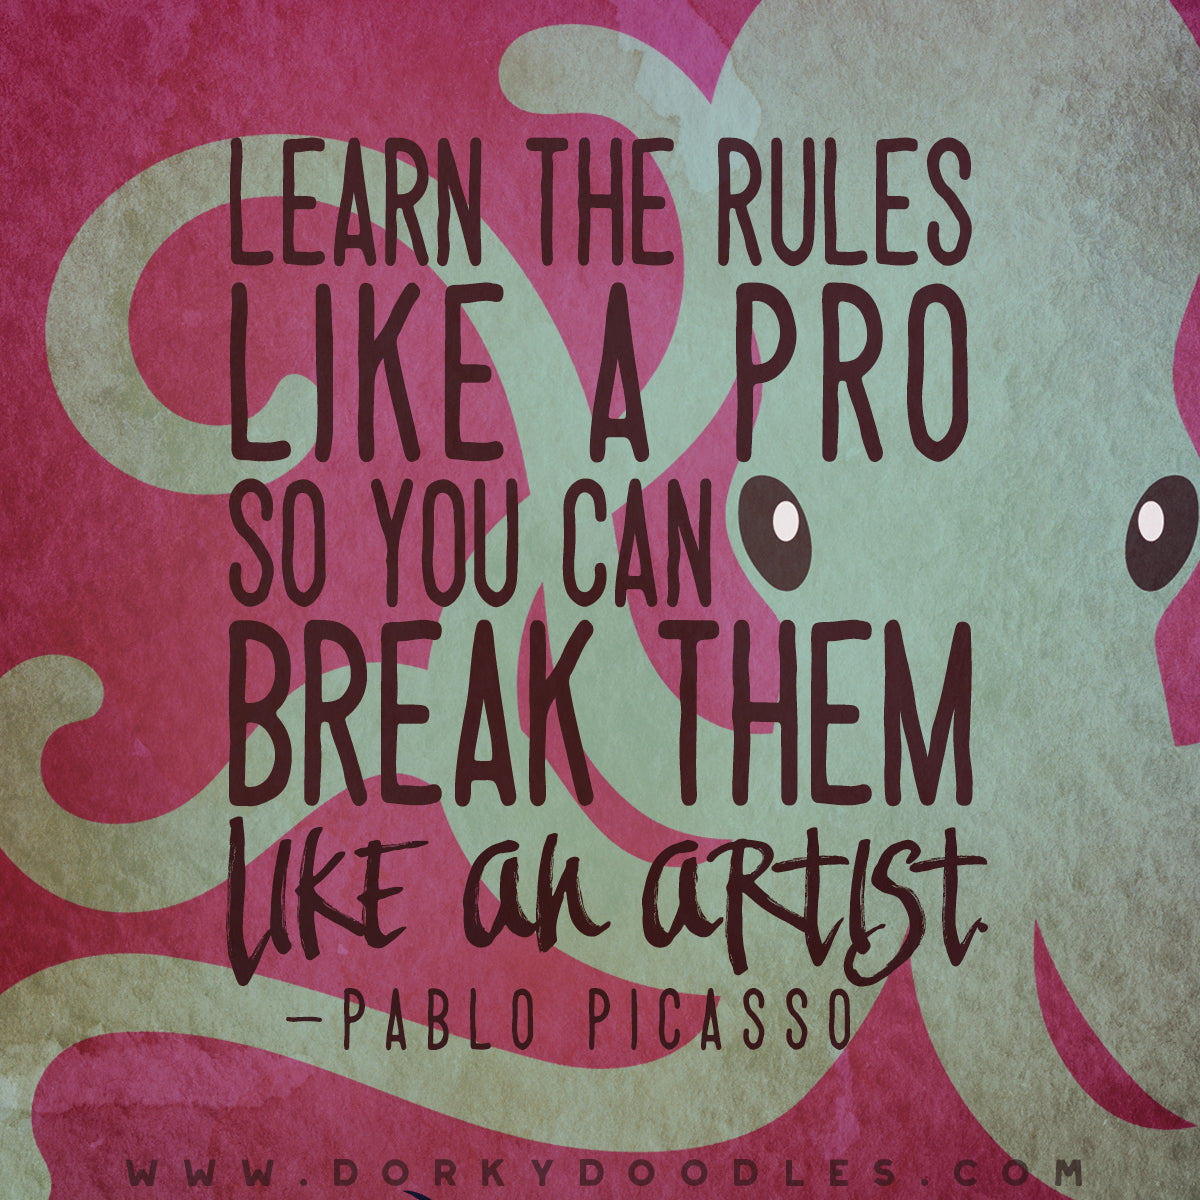 motivational quote - learn the rules so you can break them